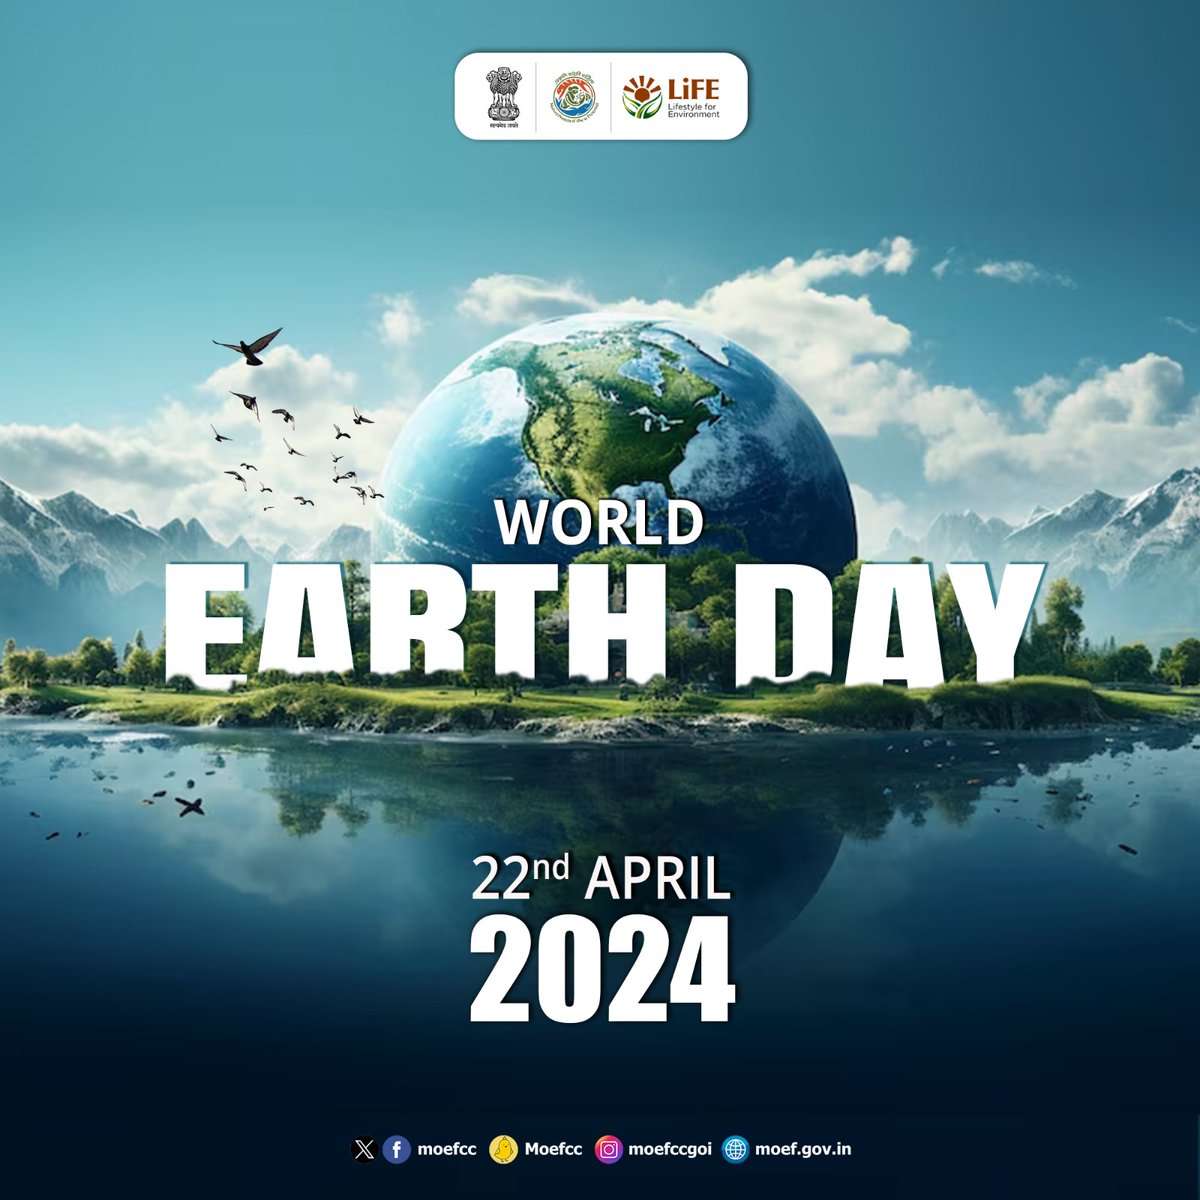 Happy World Earth Day! Let's take a moment to appreciate the beauty of our planet and recommit to protecting it for future generations. Every small action counts towards a greener, more sustainable world. #WorldEarthDay #ProtectOurPlanet @byadavbjp